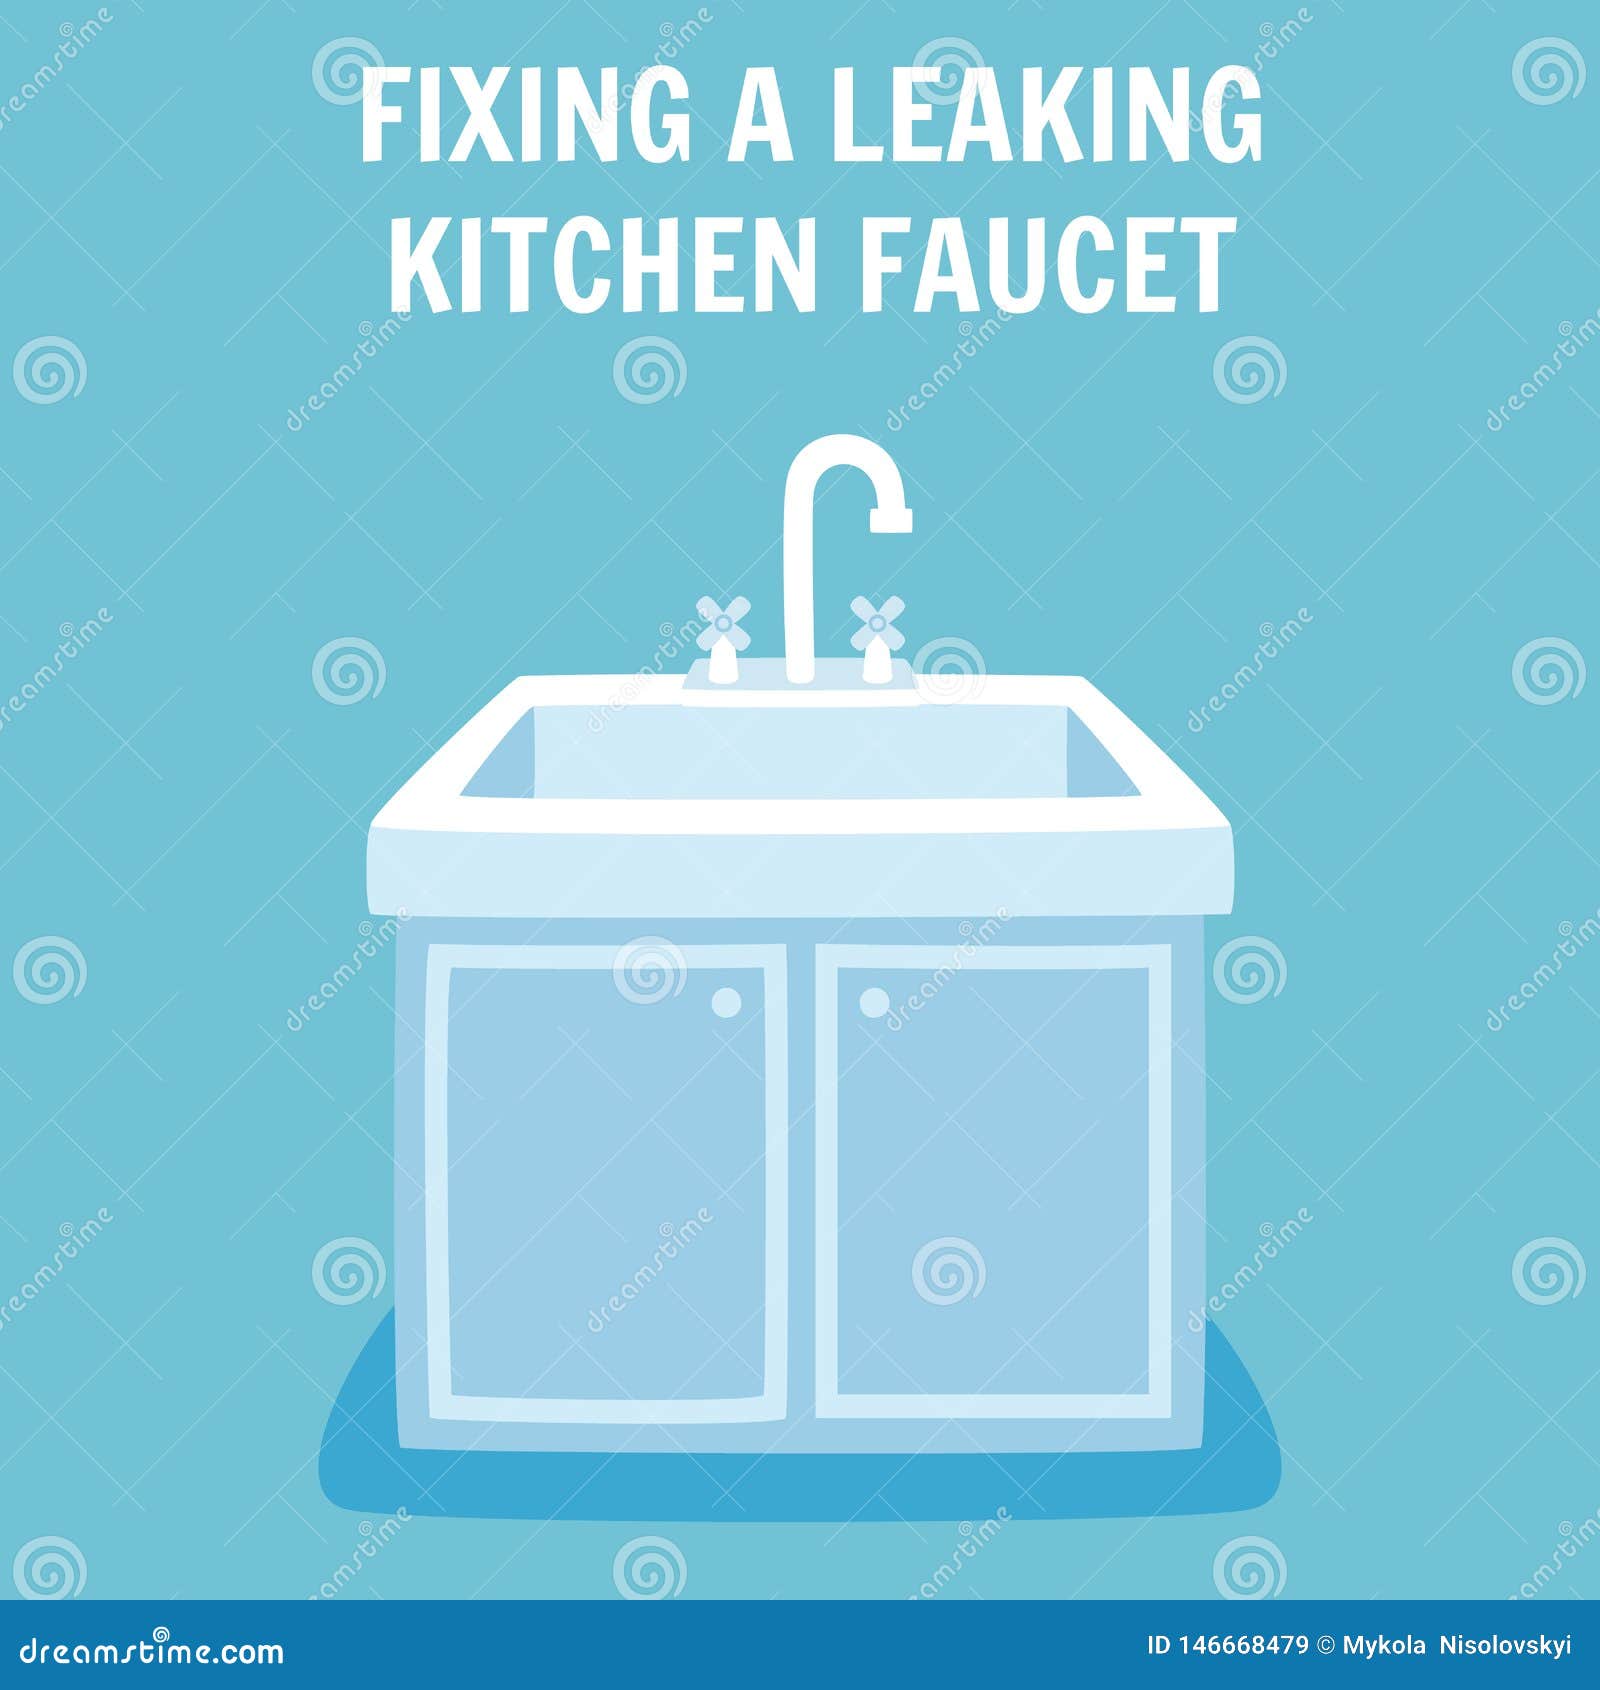 Fixing Leaking Kitchen Faucet Banner Concept Stock Vector